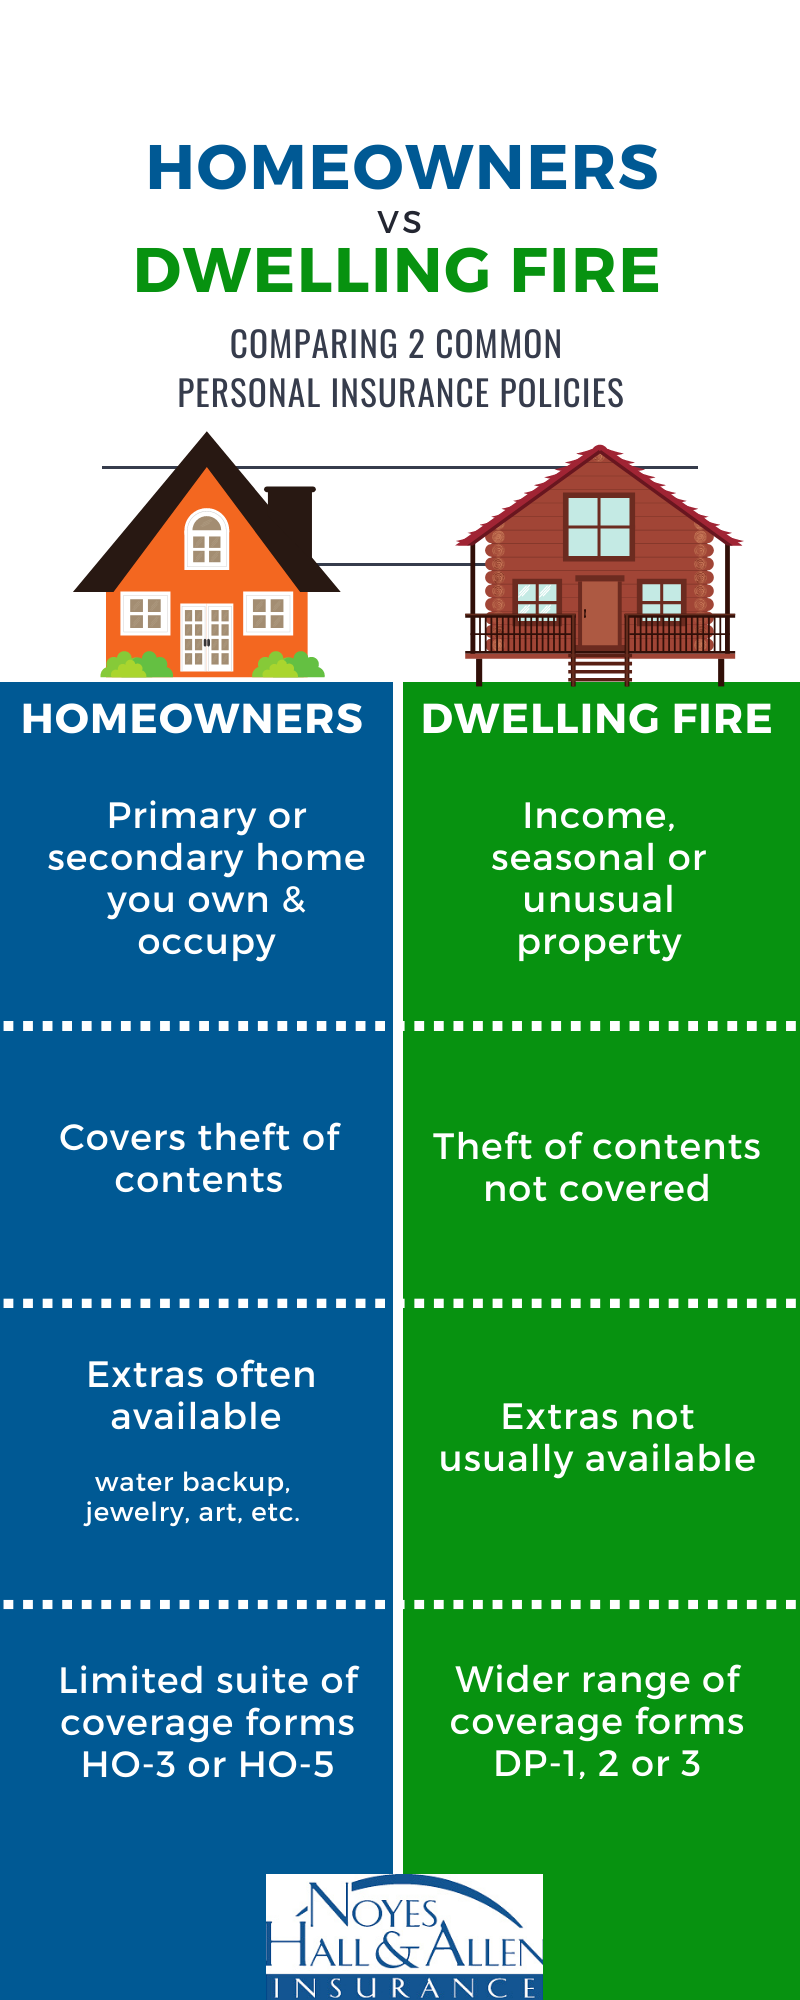 Homeowners And Dwelling Fire Policies Whats The Difference